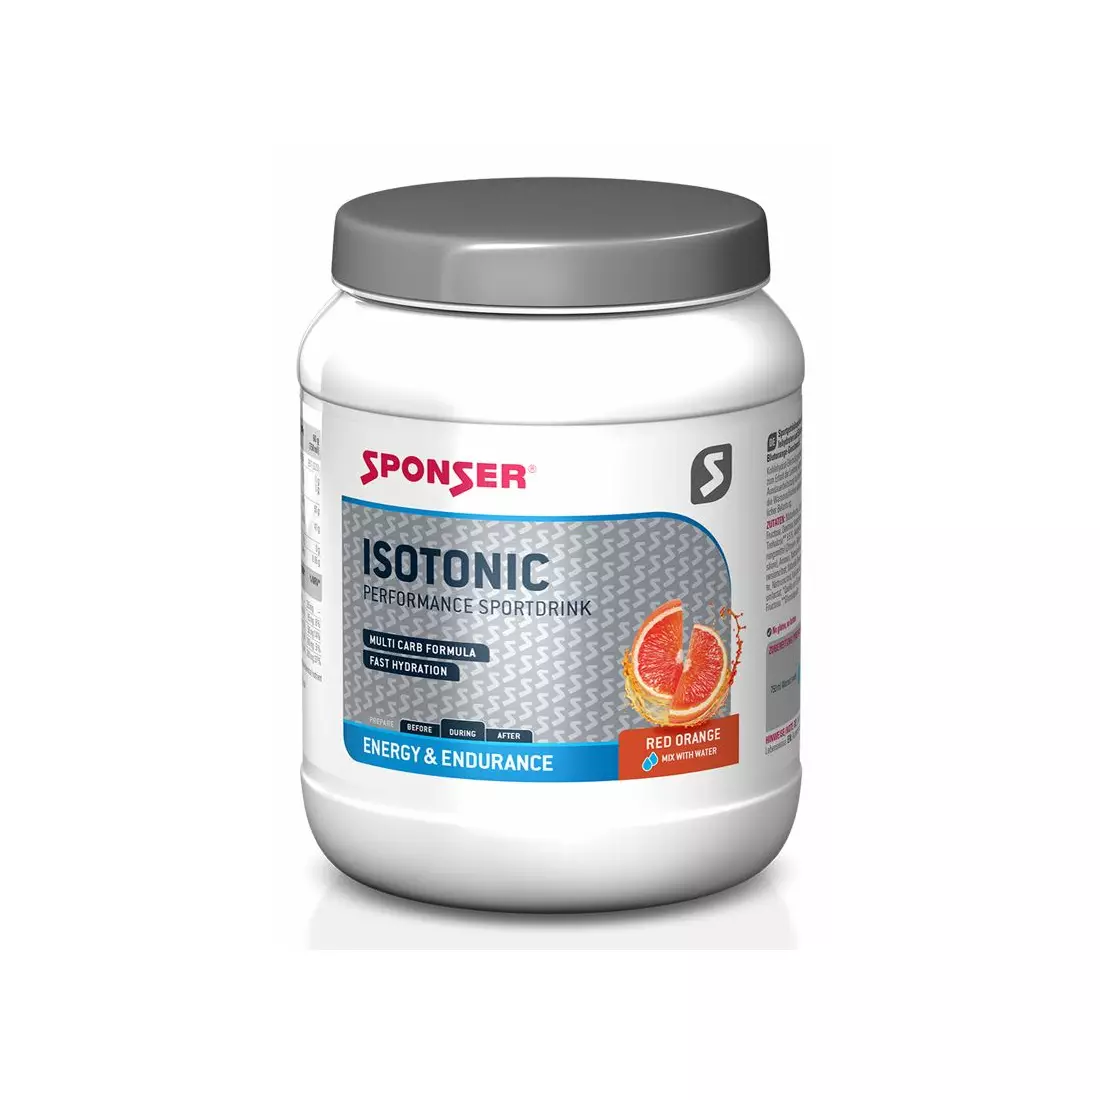 Drink SPONSER ISOTONIC red orange can 1000g